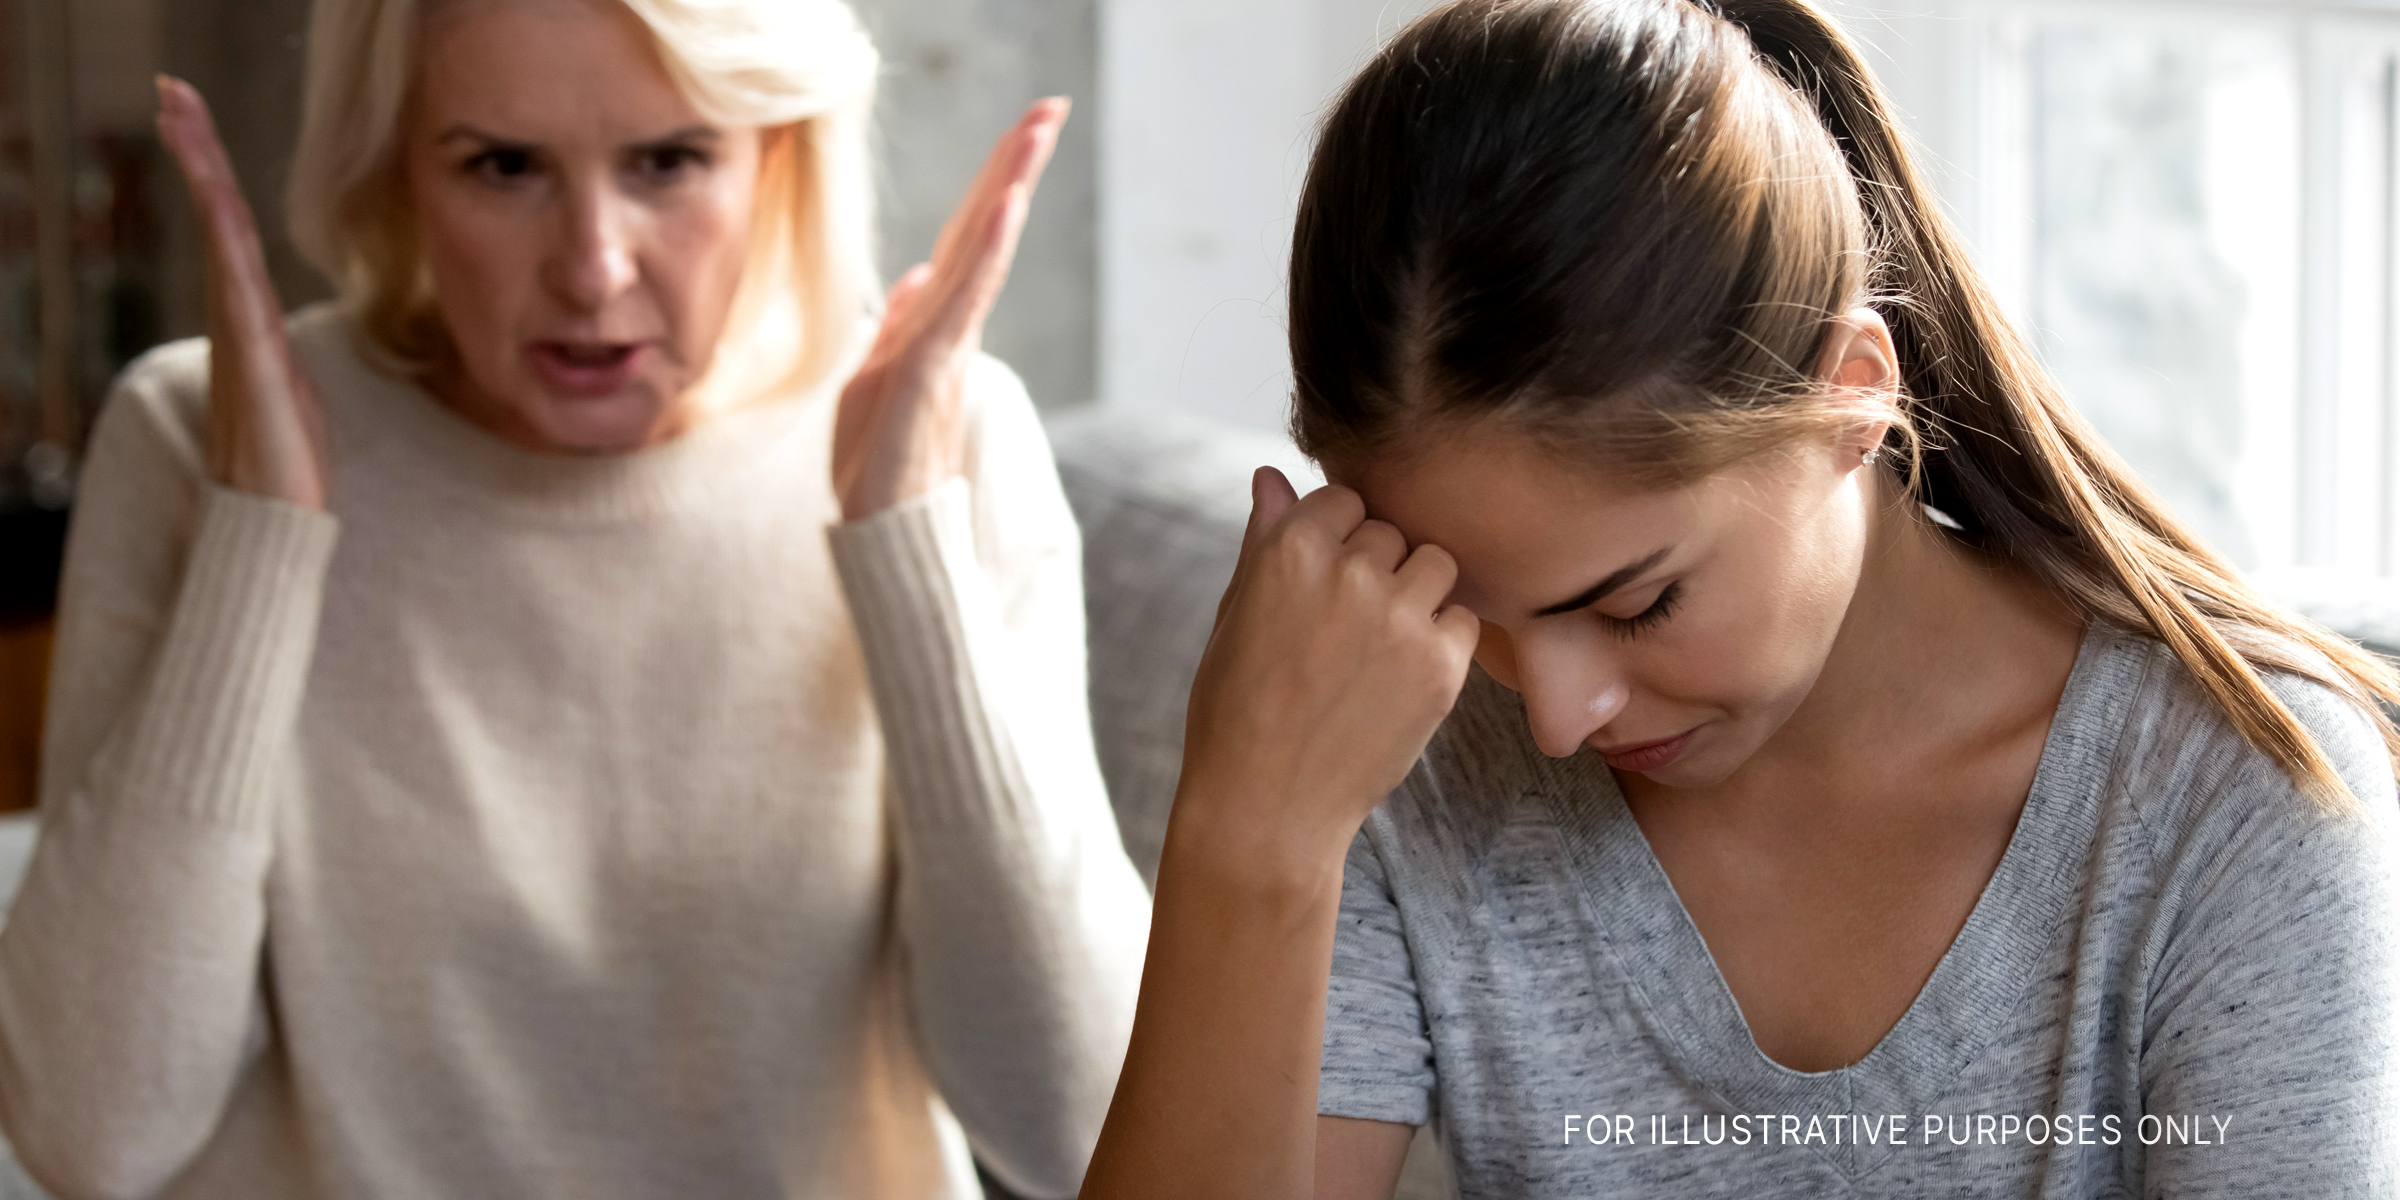 Woman confronts a younger girl | Source: Shutterstock